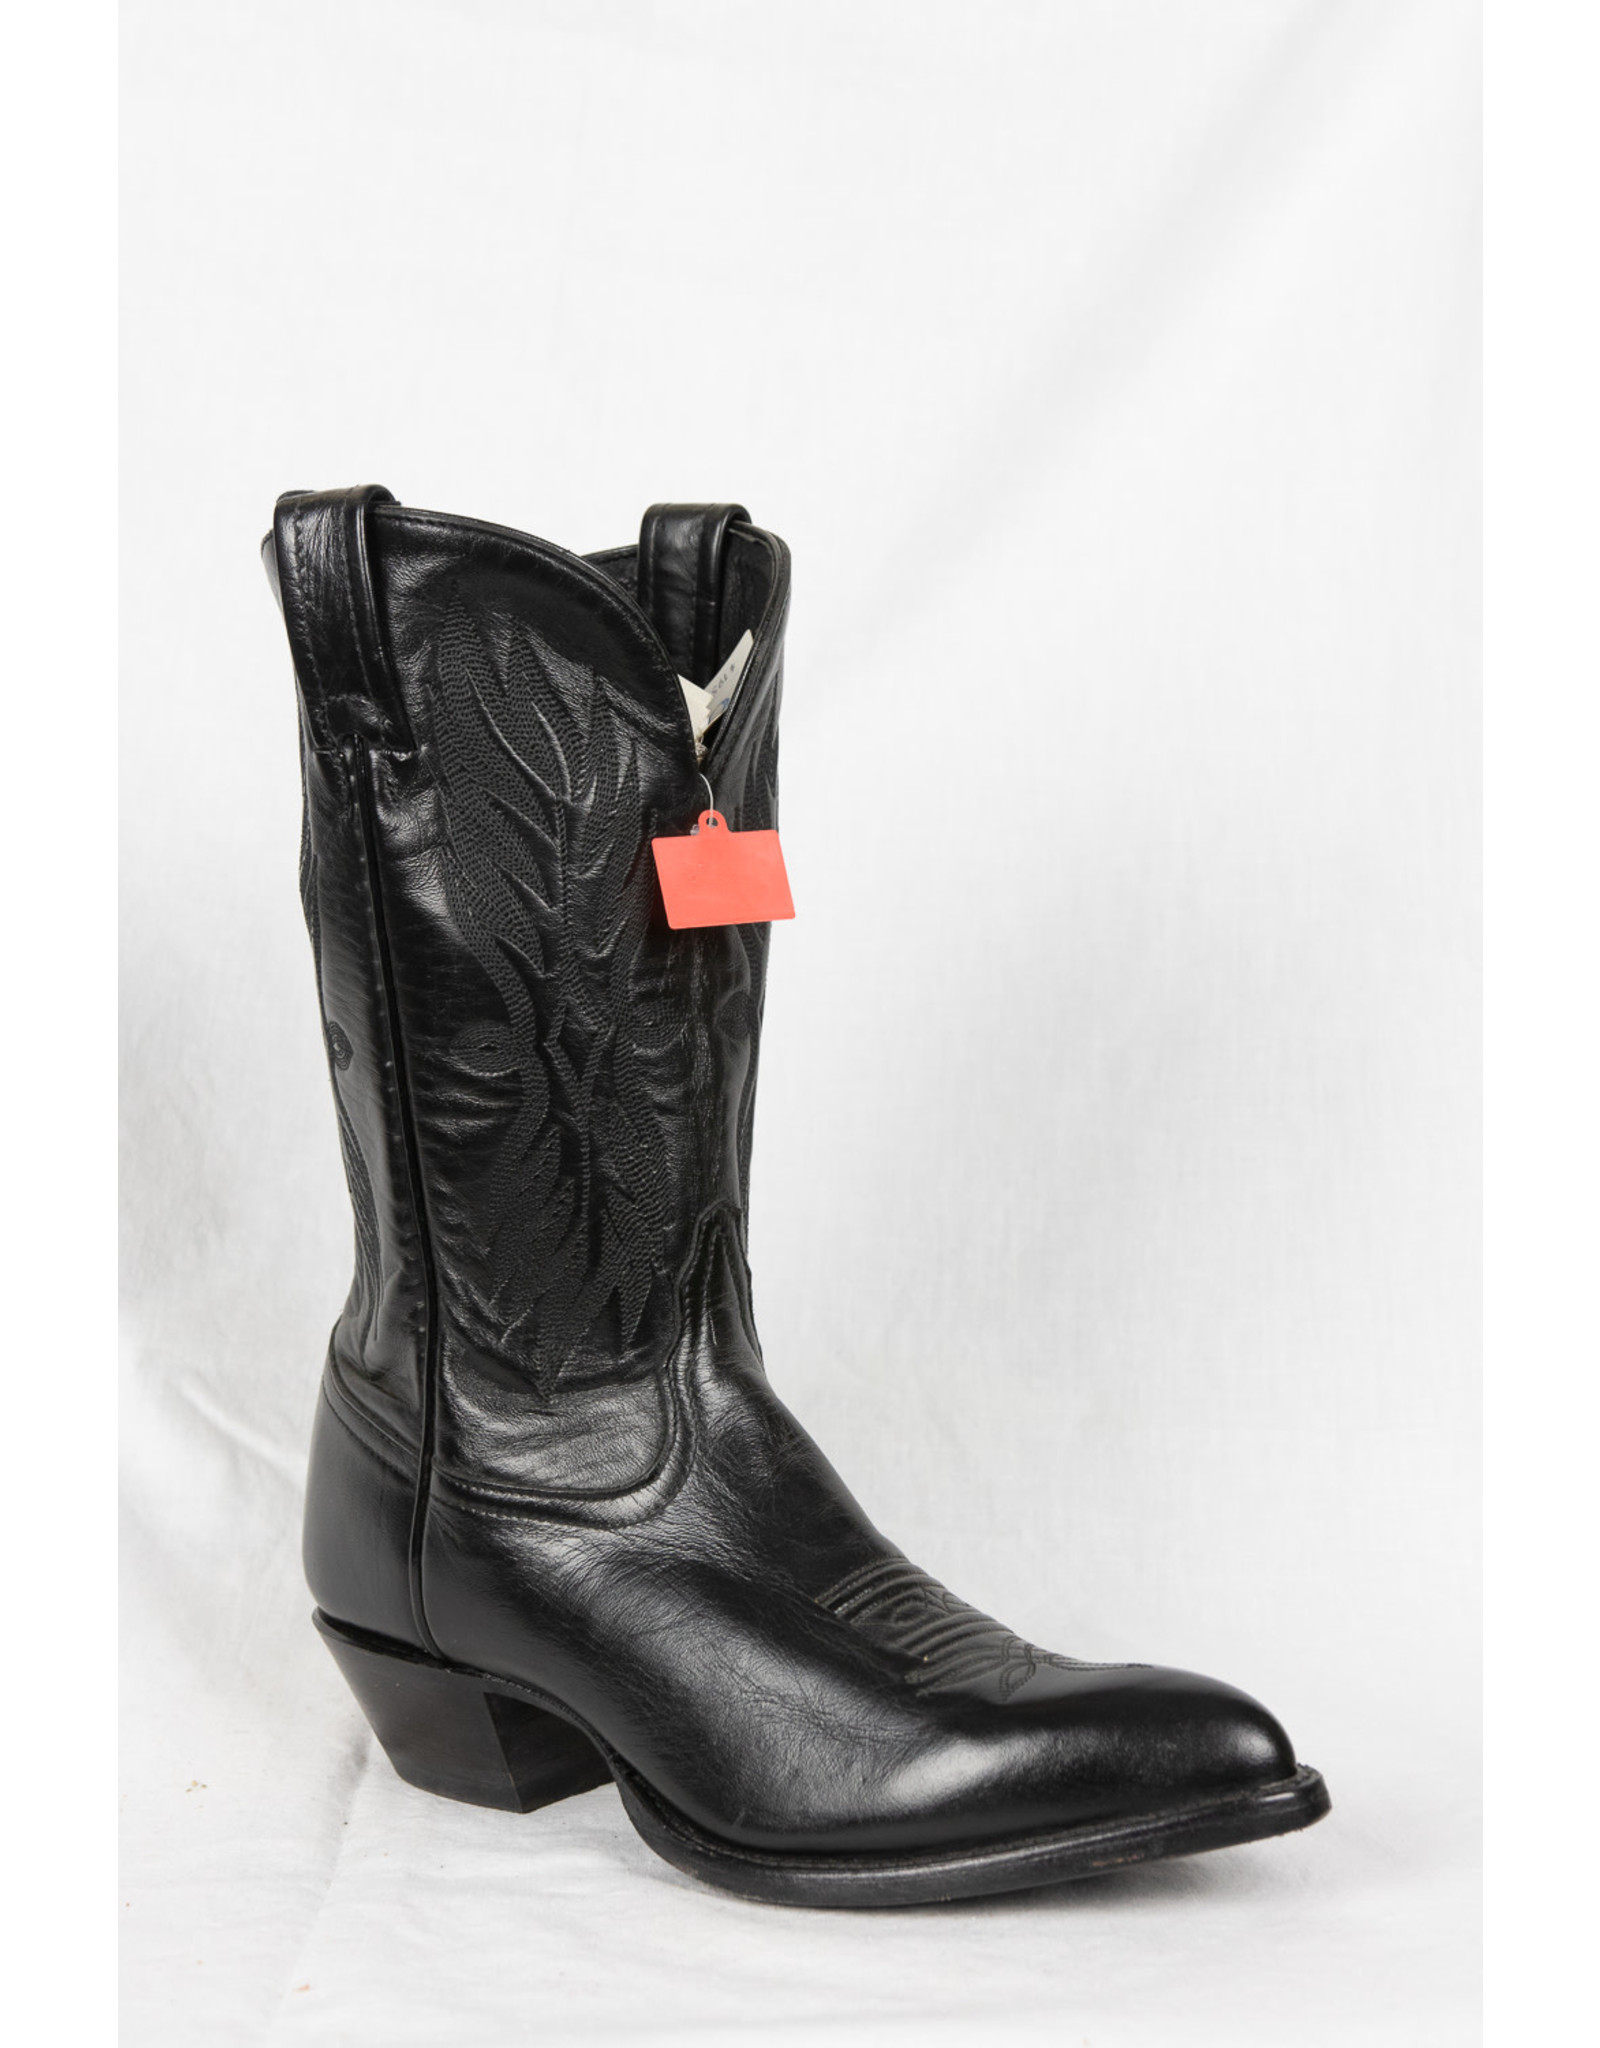 online cowboy boot stores